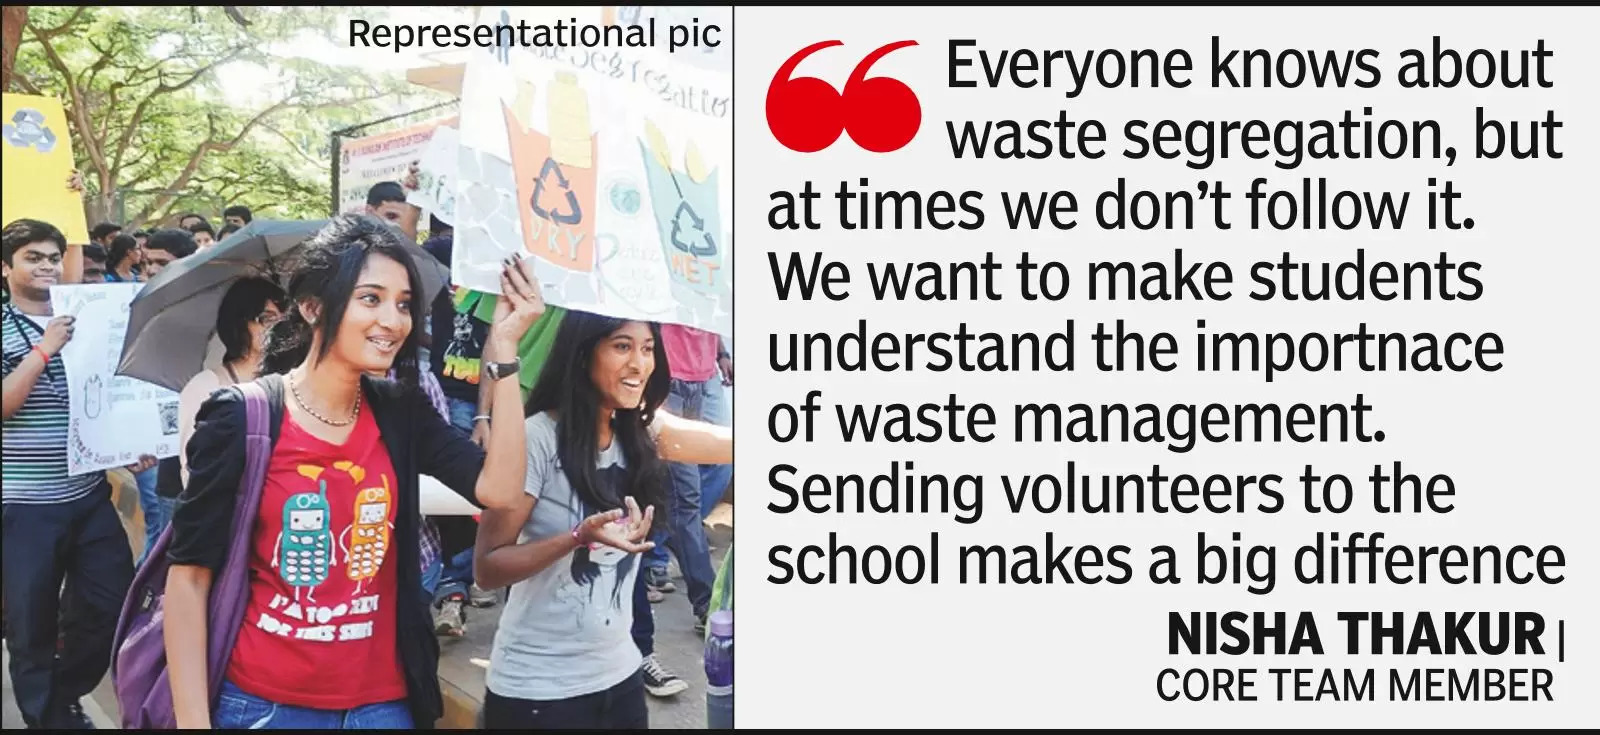 Nagpur@2025: Teaching students about waste segregation to make city clean